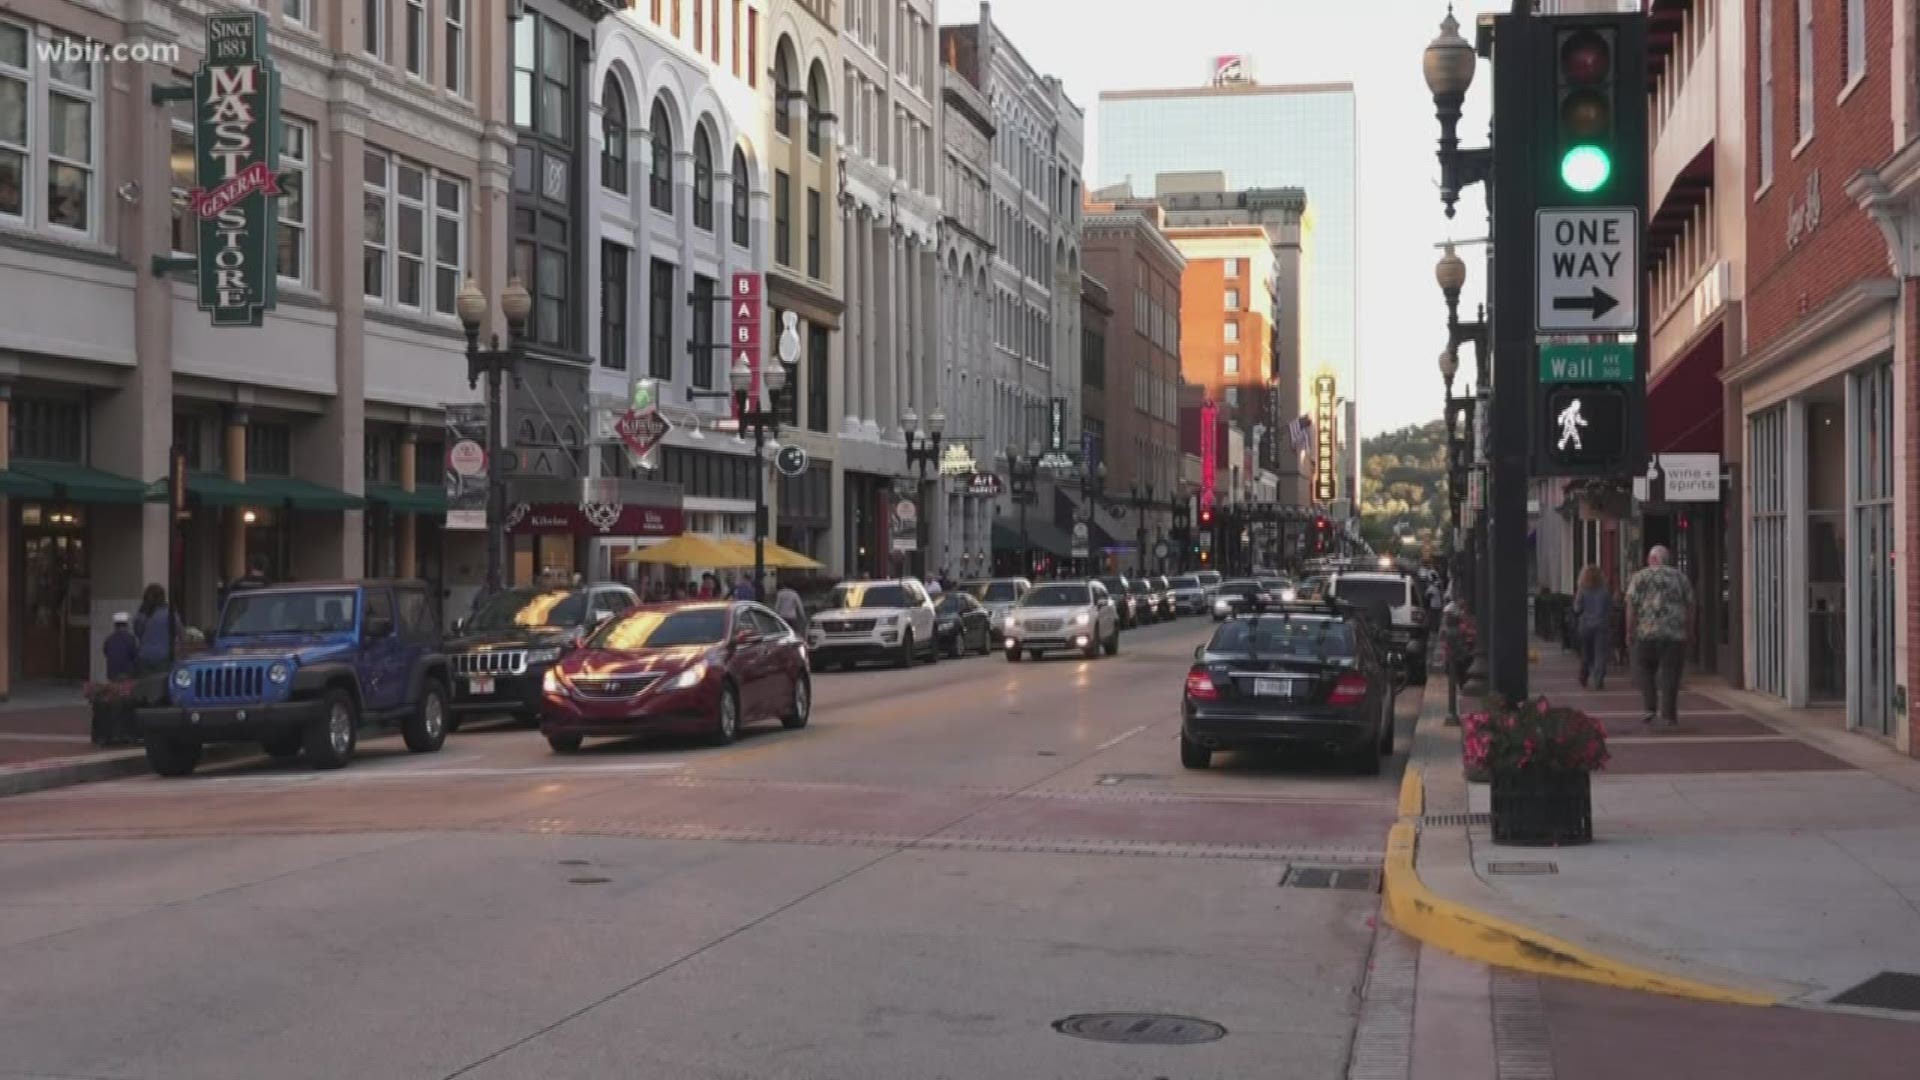 Airbnb owners, downtown businesses and others are affected by the spread of COVID-19.